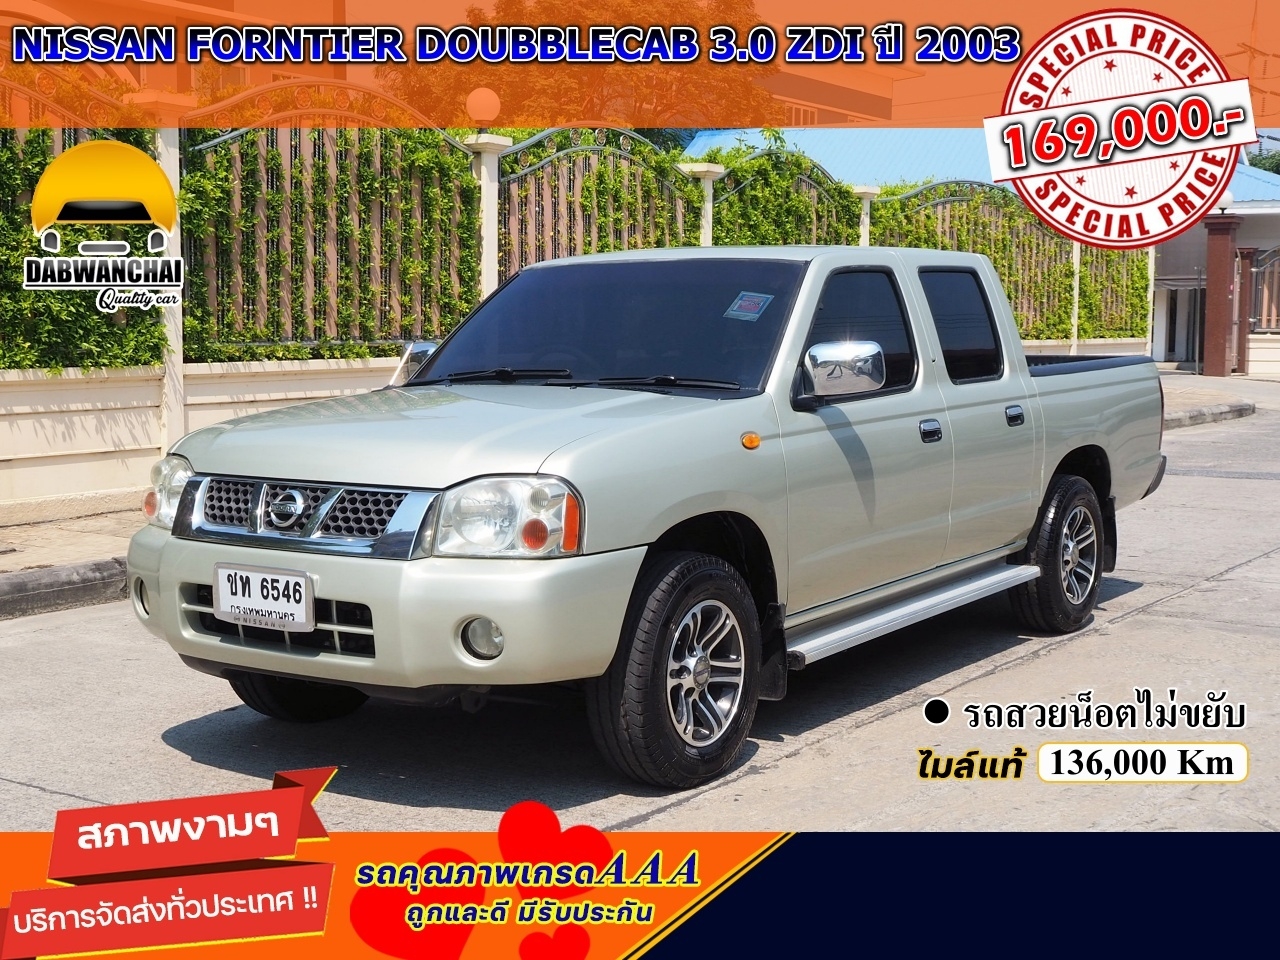 NISSAN FORNTIER DOUBBLECAB 3.0 ZDI ปี 2003  รูปที่ 1